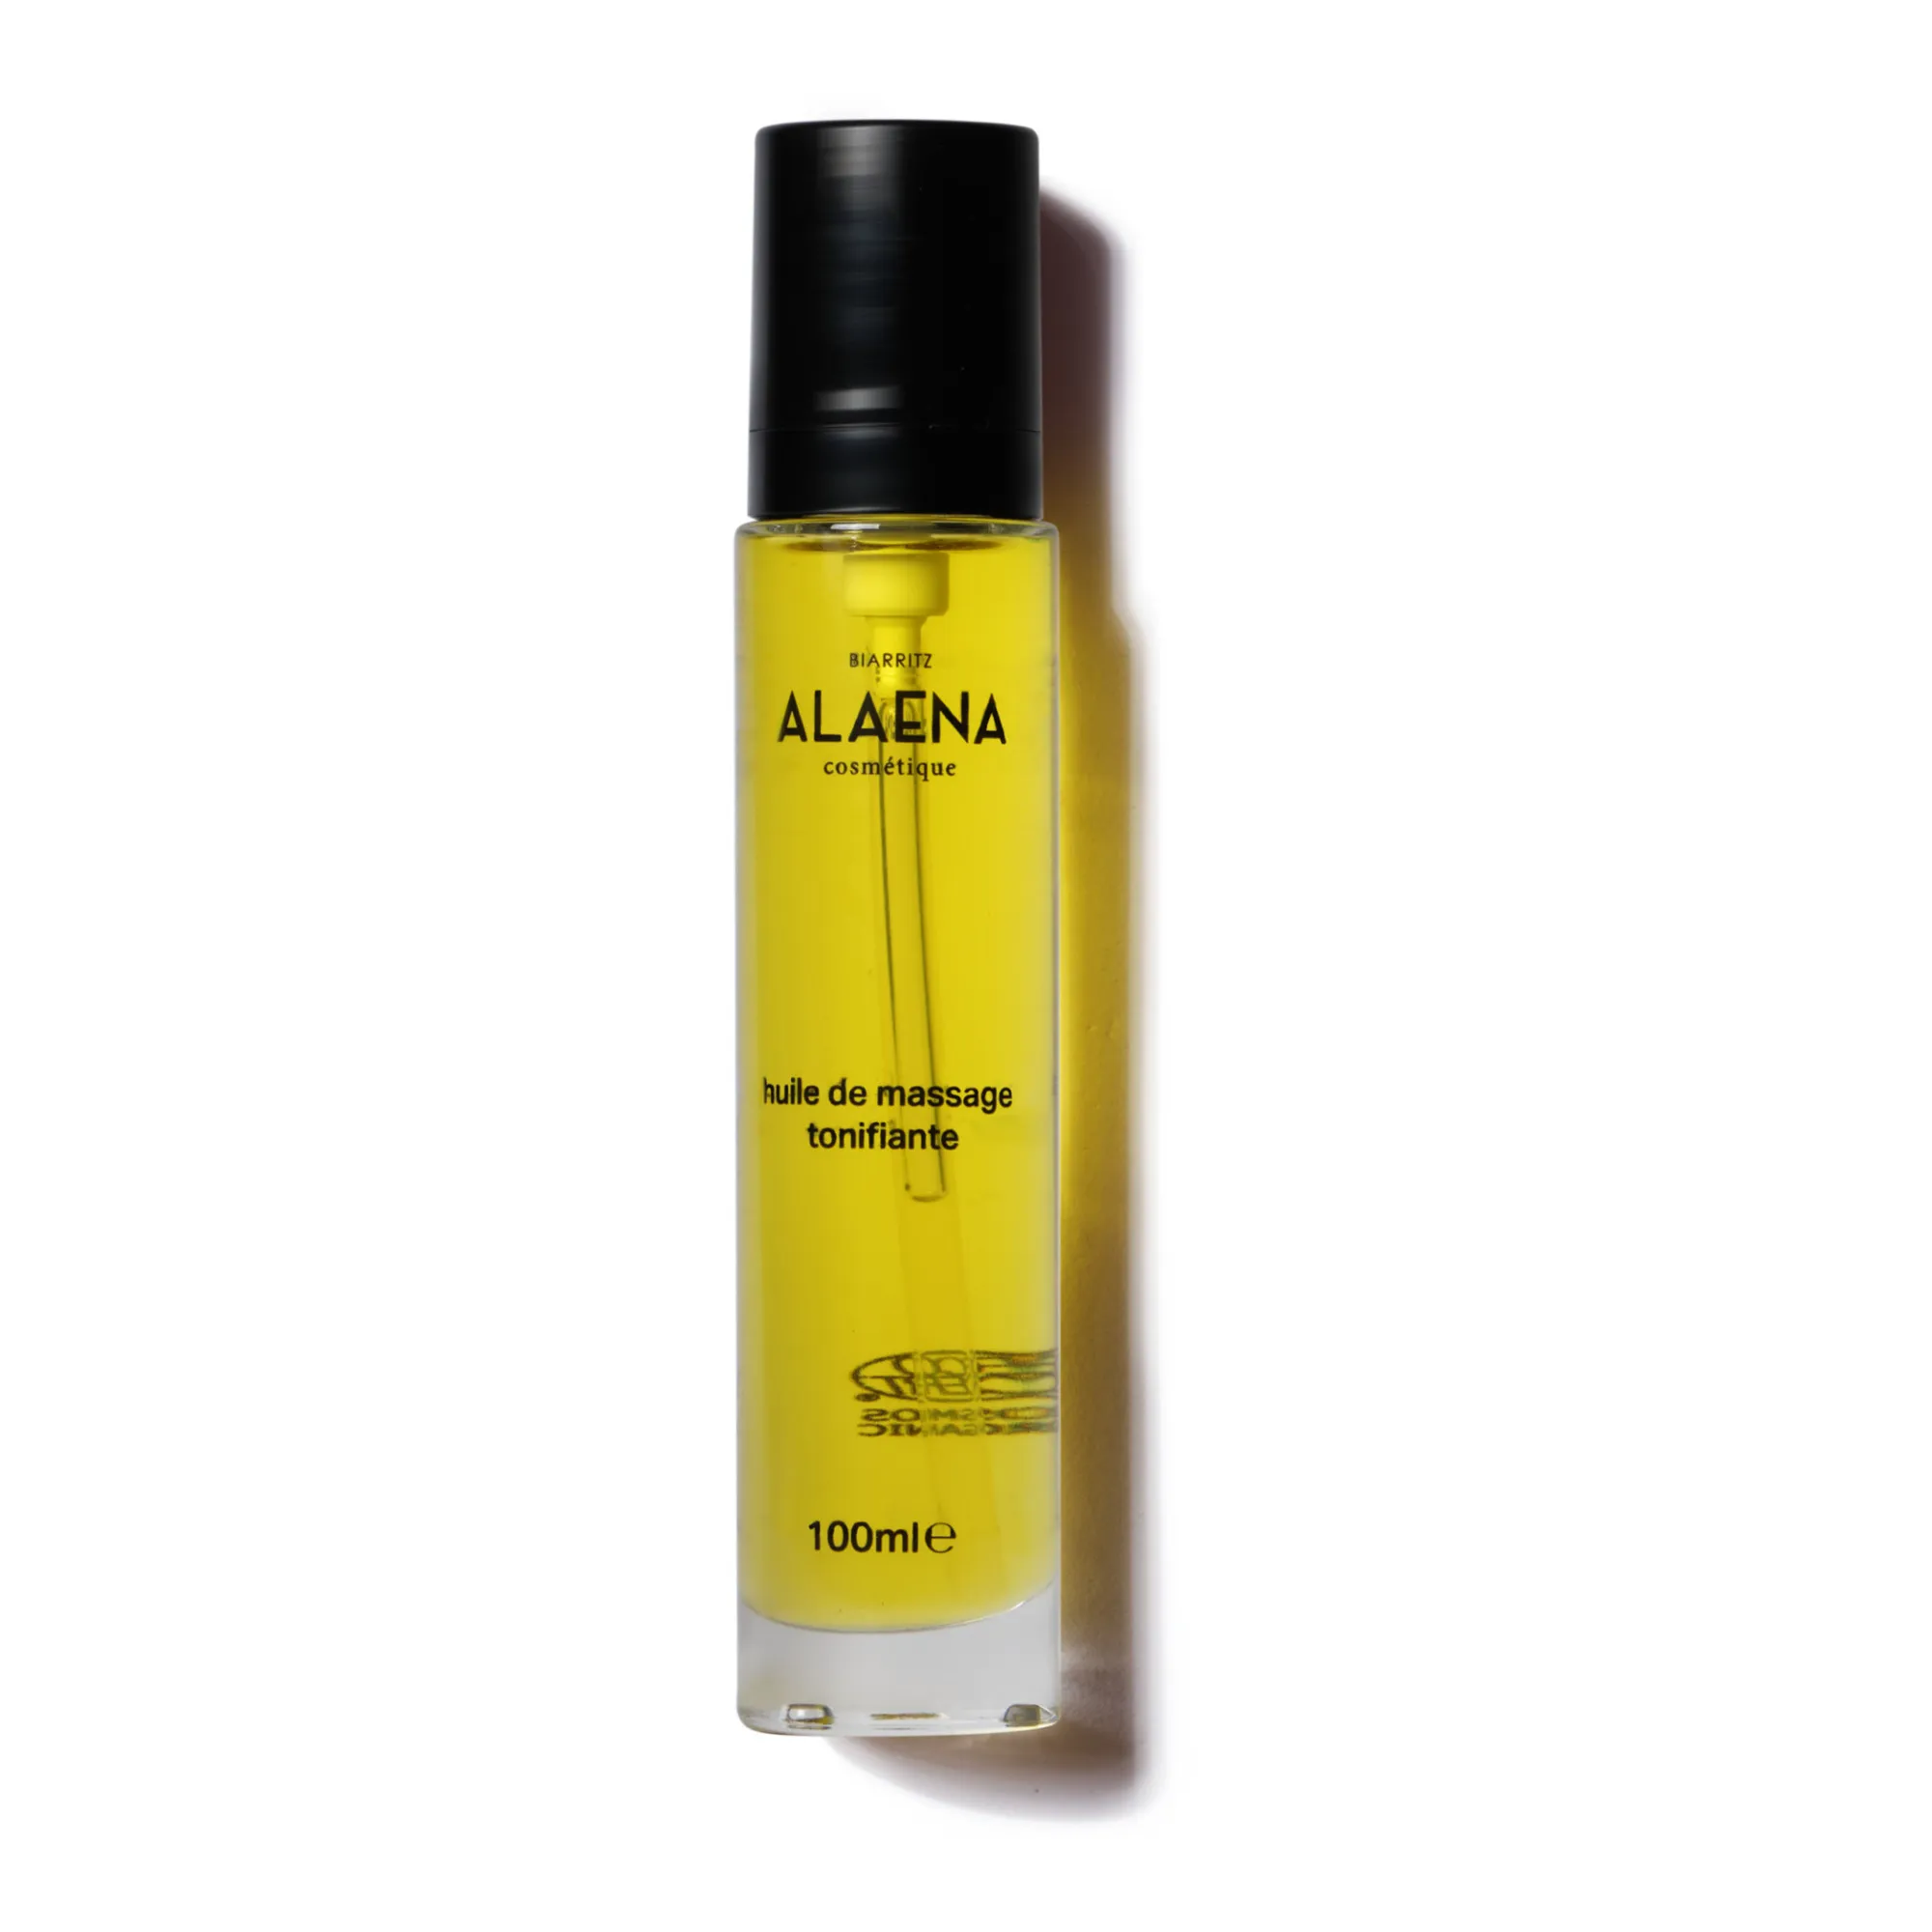 Product Video Placeholder: Toning Massage Oil - 100 ml